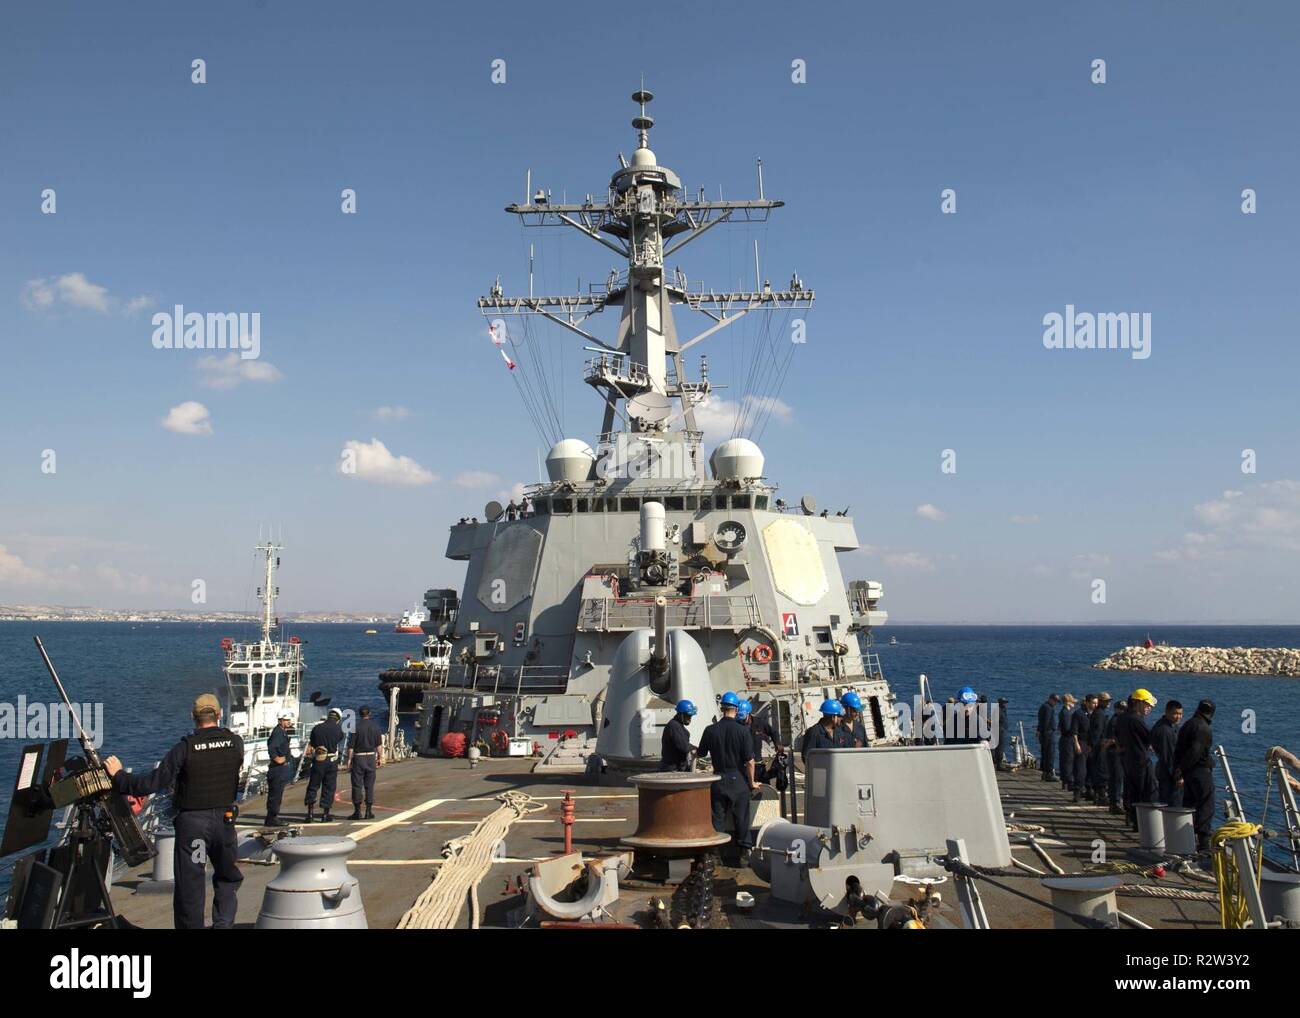 LARNACA, Cyprus (Nov. 9, 2018) The Arleigh Burke-class guided-missile destroyer USS Arleigh Burke (DDG 51) arrives at Larnaca, Cyprus for a scheduled port visit Nov. 9, 2018. Arleigh Burke, homeported at Naval Station Norfolk, is conducting naval operations in the U.S. 6th Fleet area of operations in support of U.S. national security interests in Europe and Africa. Stock Photo